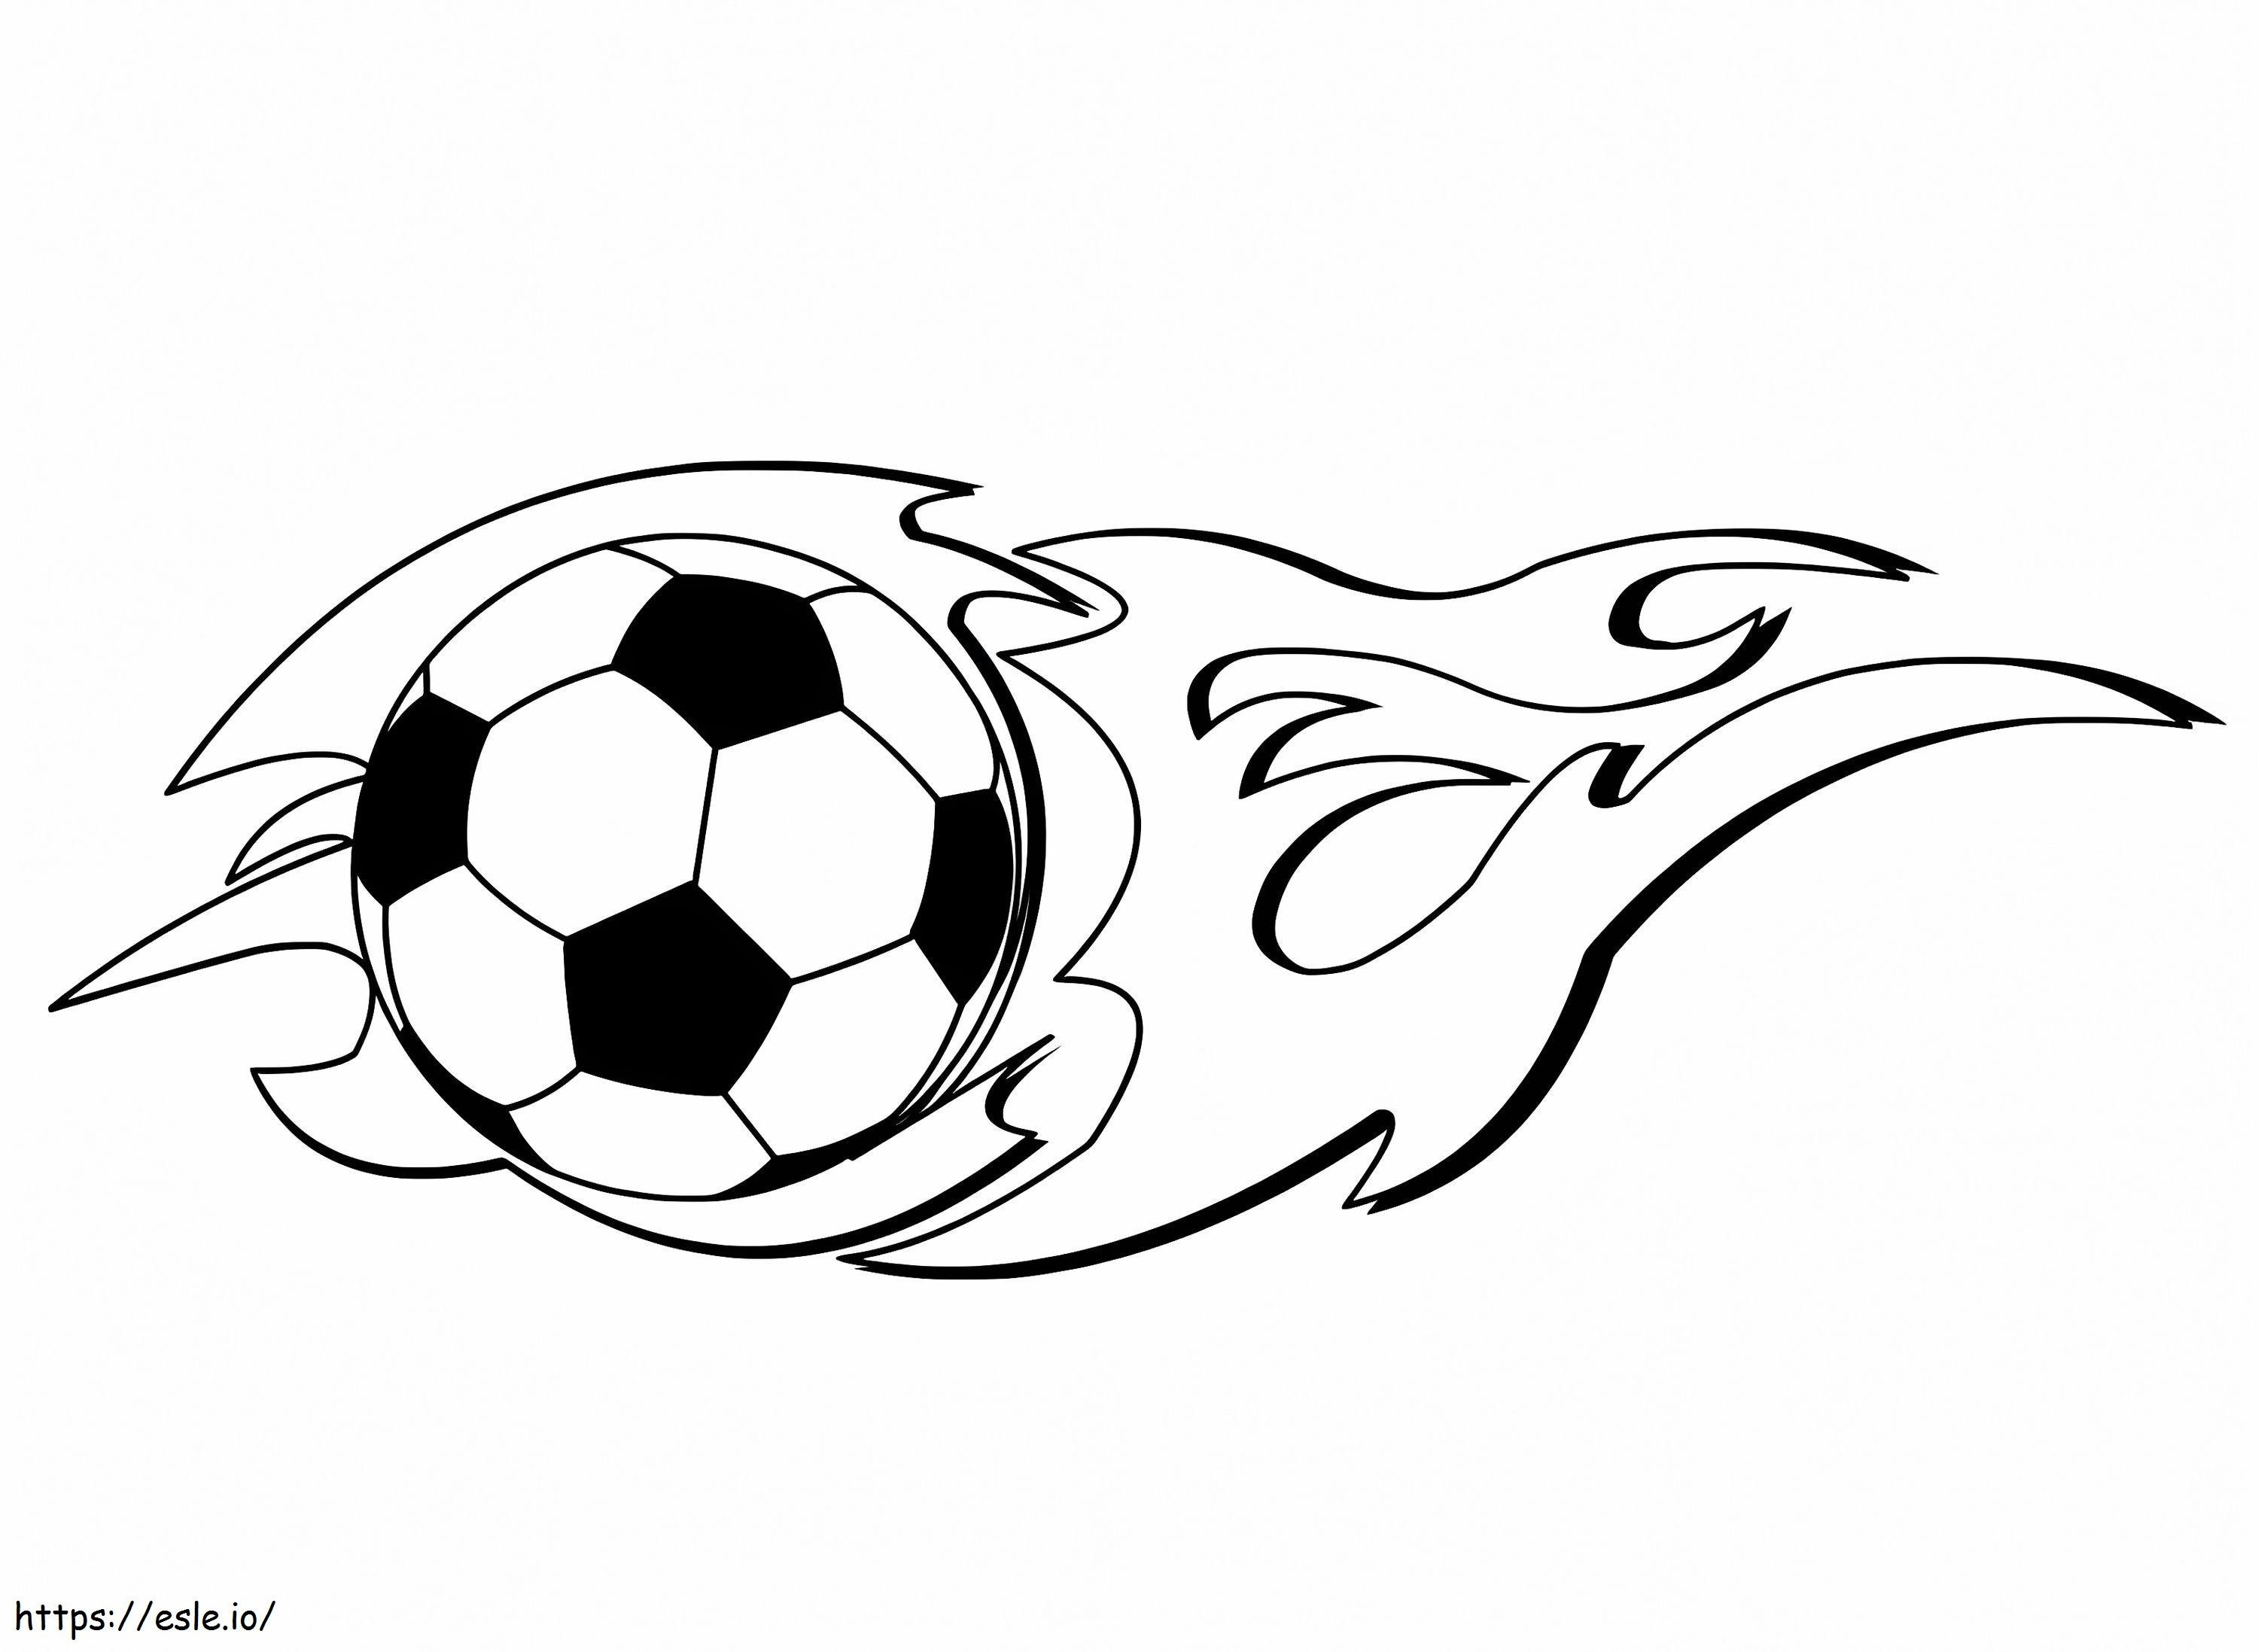 1542595957 Rome Football Clipart 8 coloring page